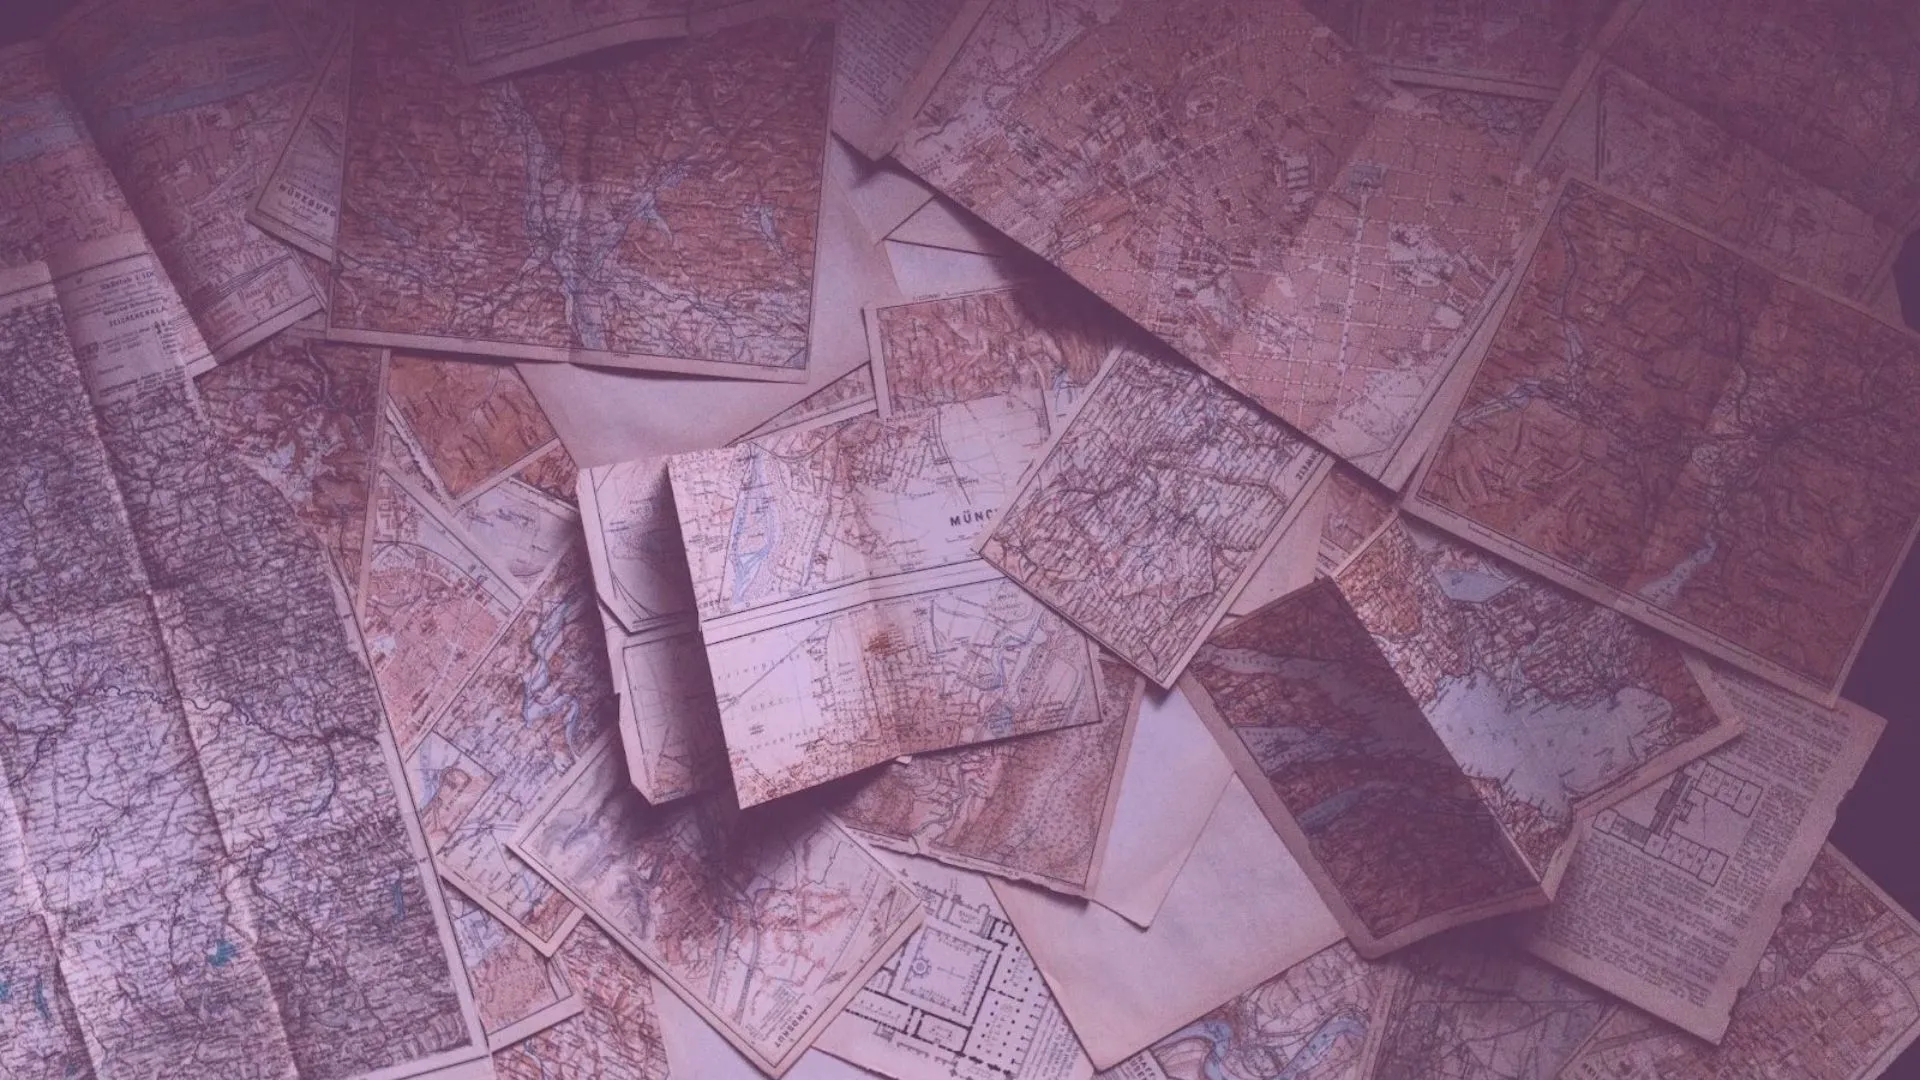 Old maps on a table representing product roadmaps